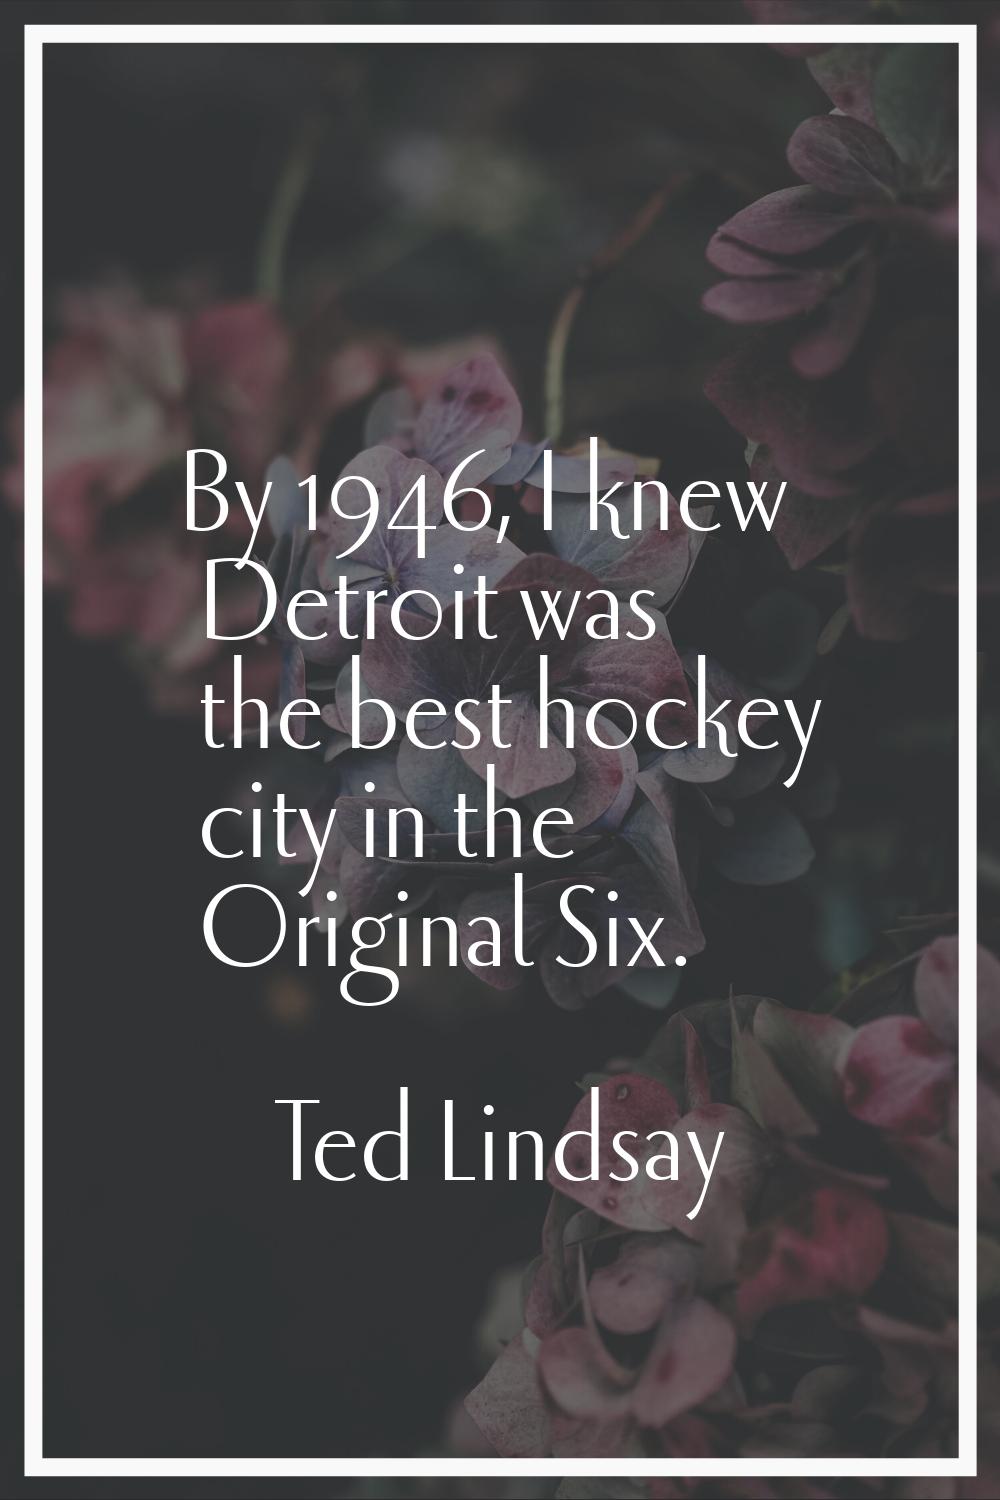 By 1946, I knew Detroit was the best hockey city in the Original Six.